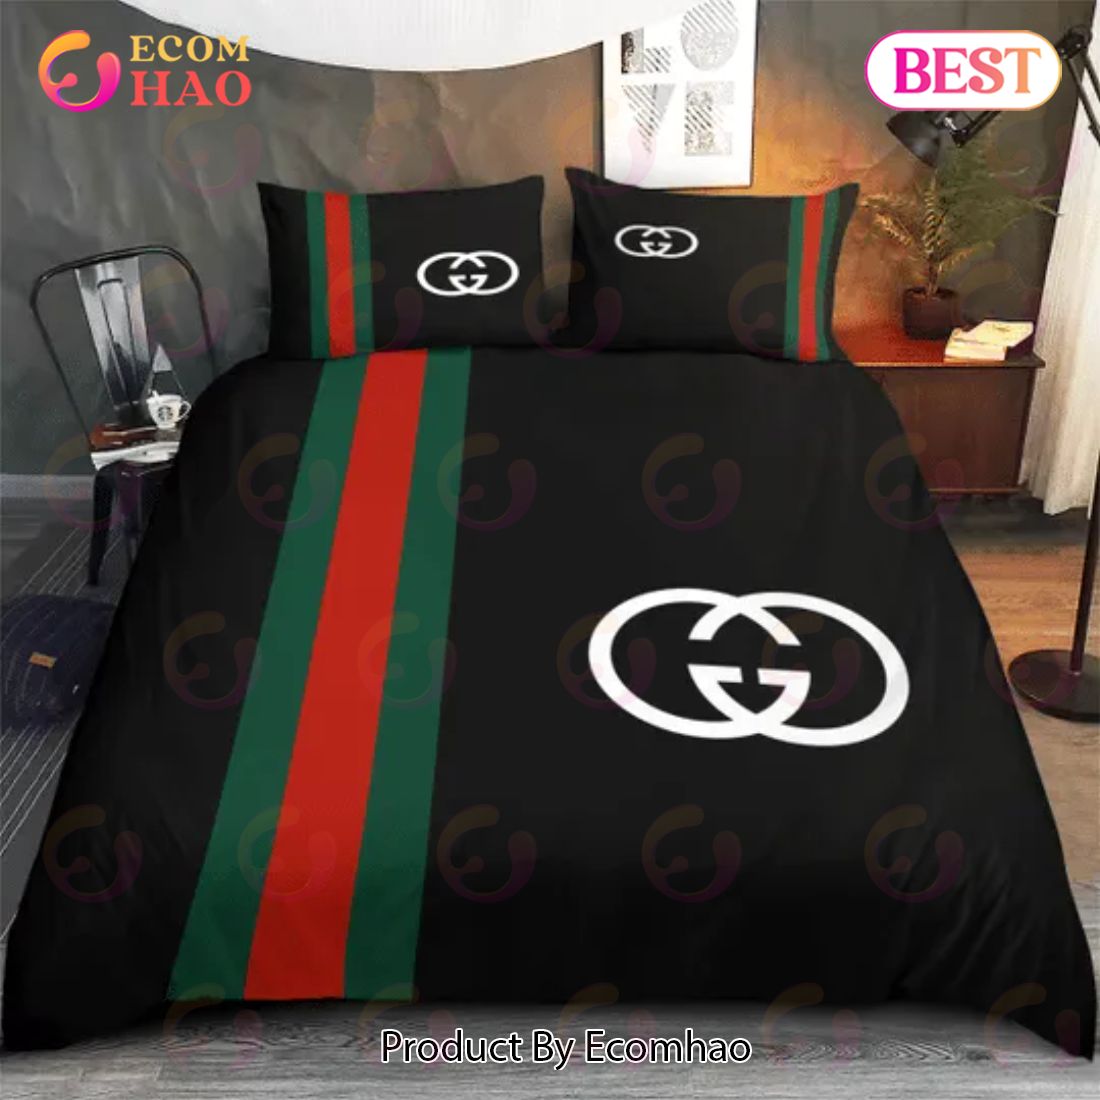 Gucci Black Luxury Brand High-End Bedding Sets Bedroom Decor Thanksgiving  Decorations For Home Best Luxury Bed Sets - Ecomhao Store